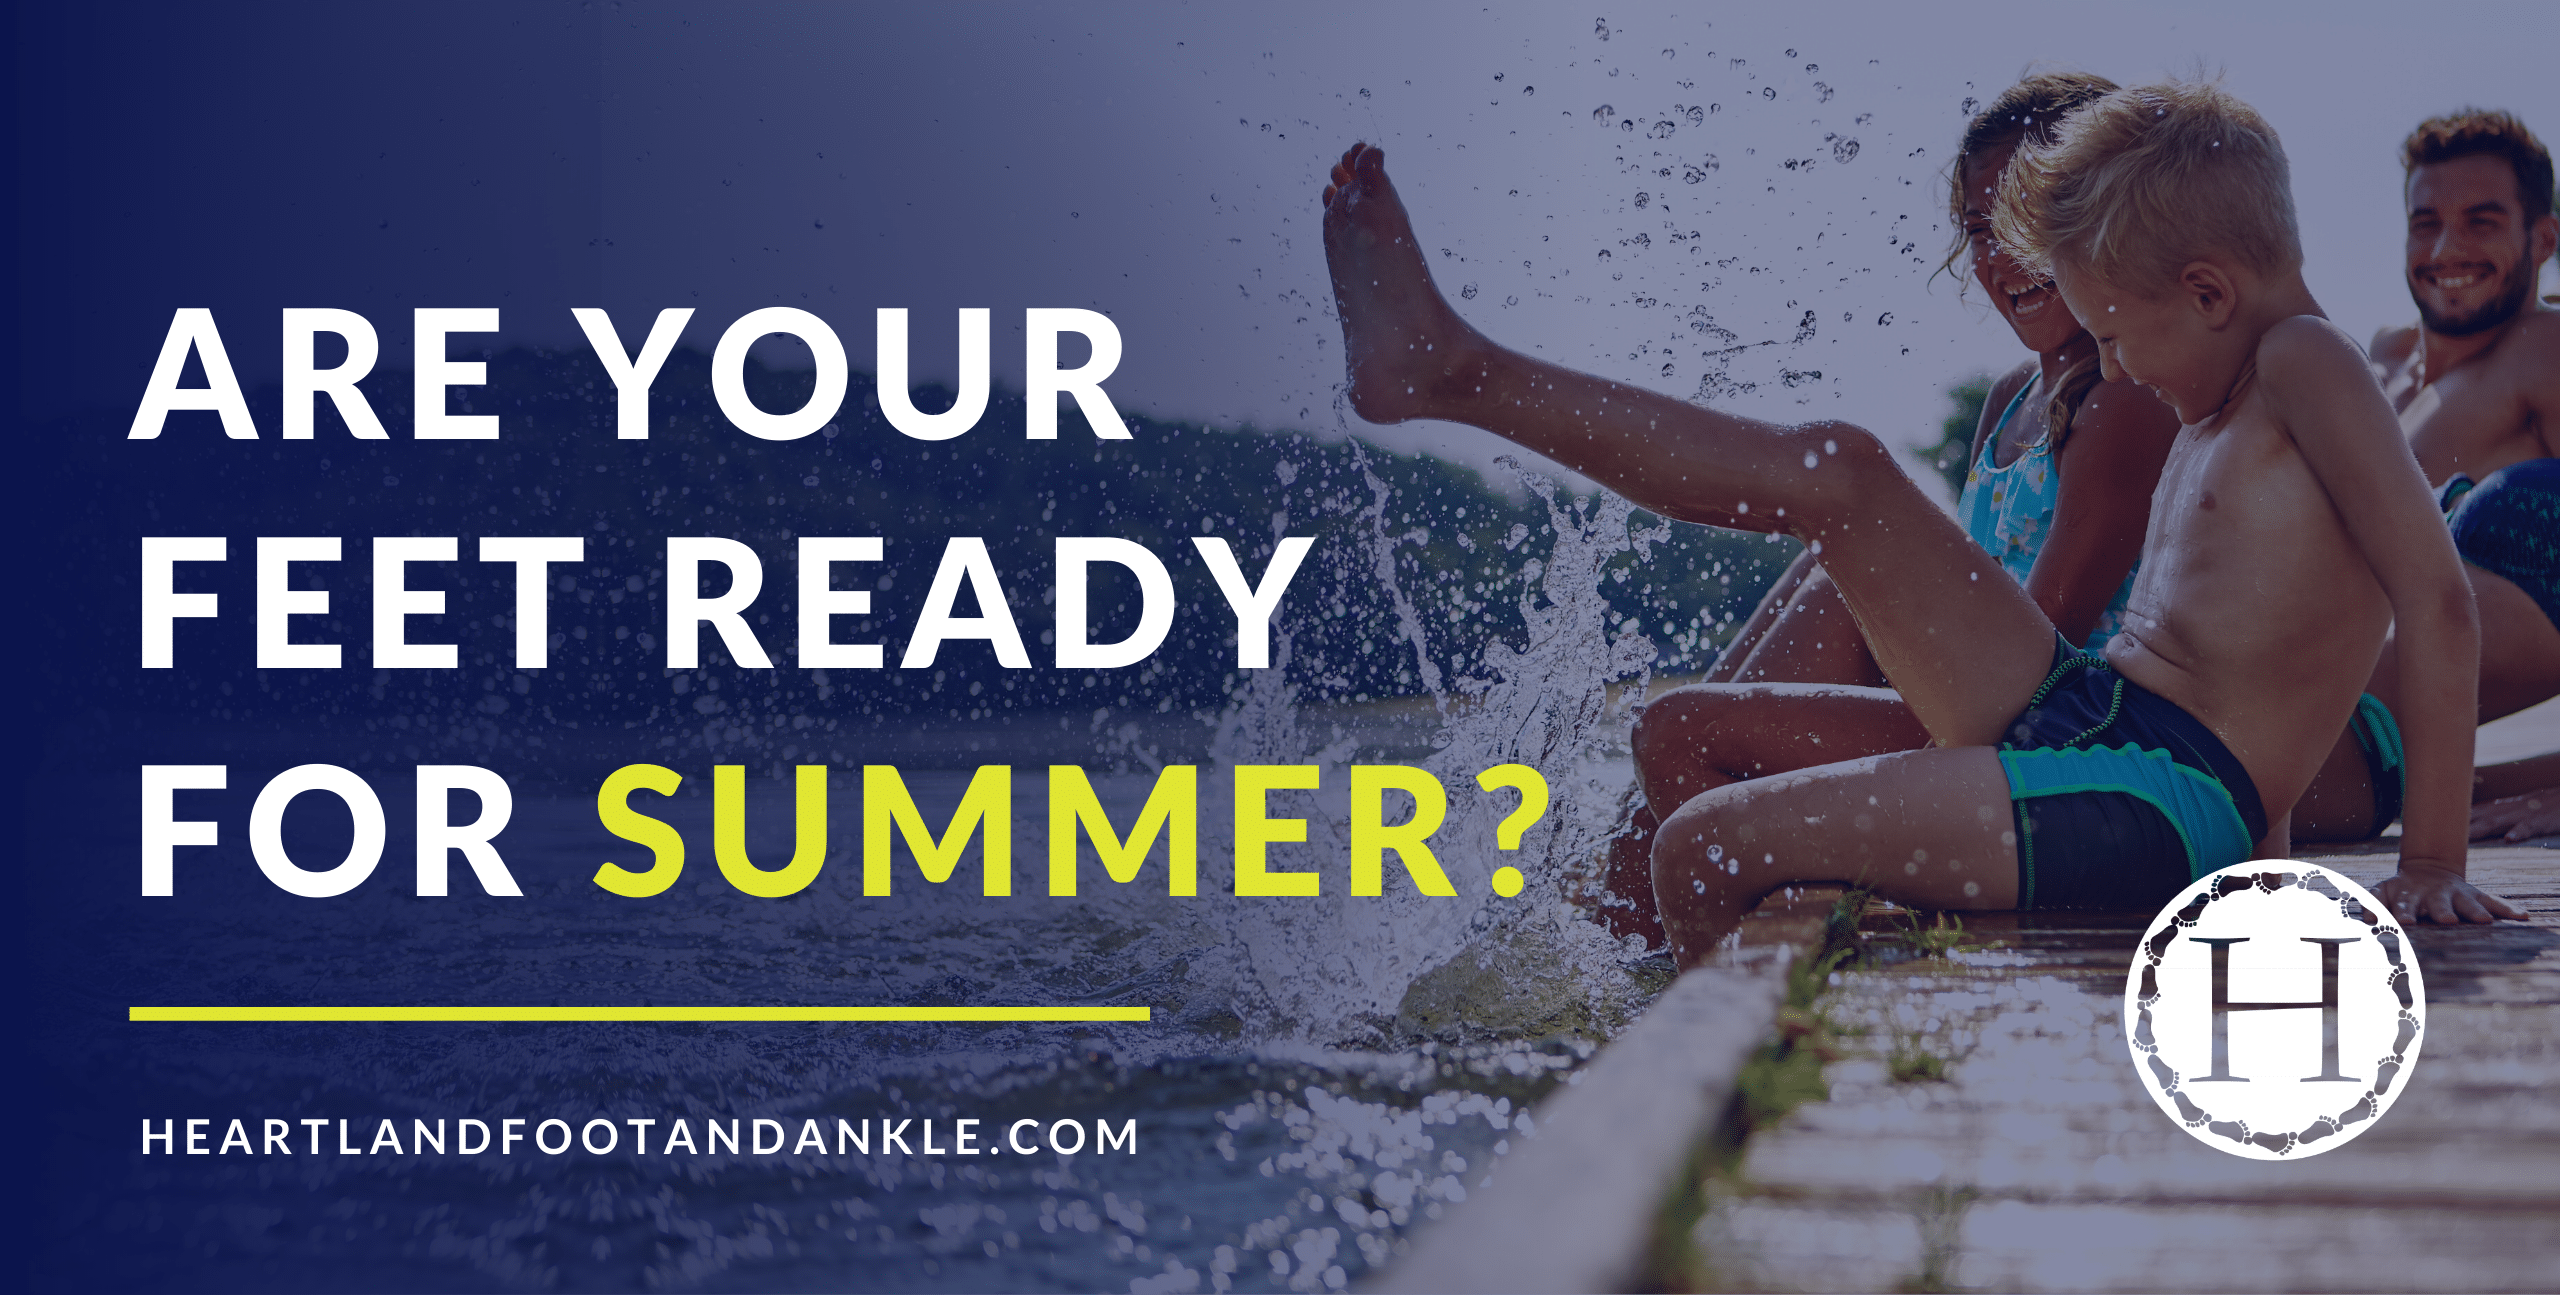 Are Your Feet Ready for Summer?